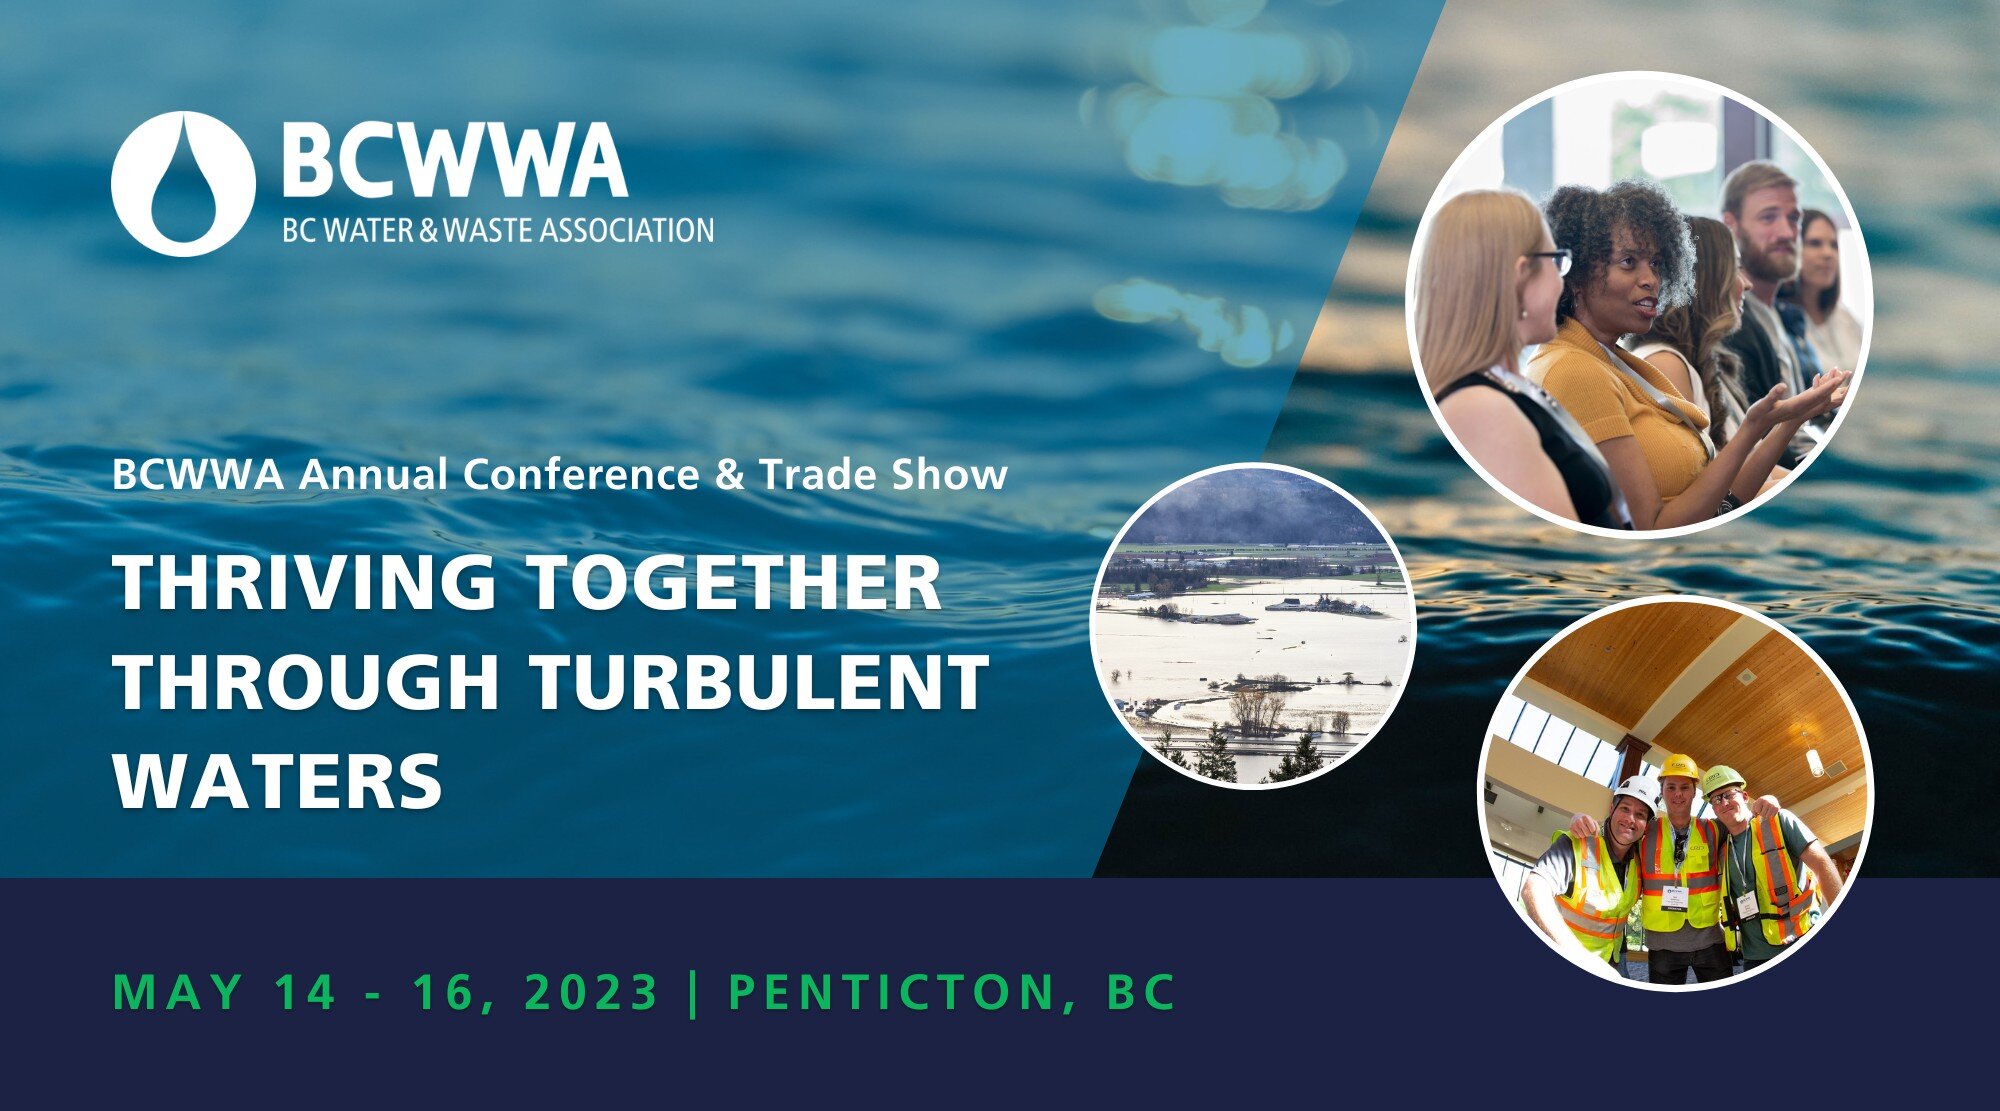 We'll be at the BCWWA Annual Conference and Trade Show on May 14-16th, come visit us at booth 817! Andrew Ambrocichuk, will be presenting about Asset Management on Tuesday May 16th at 10:15am. Learn how Sludge Surveys help when planning for lagoon, r